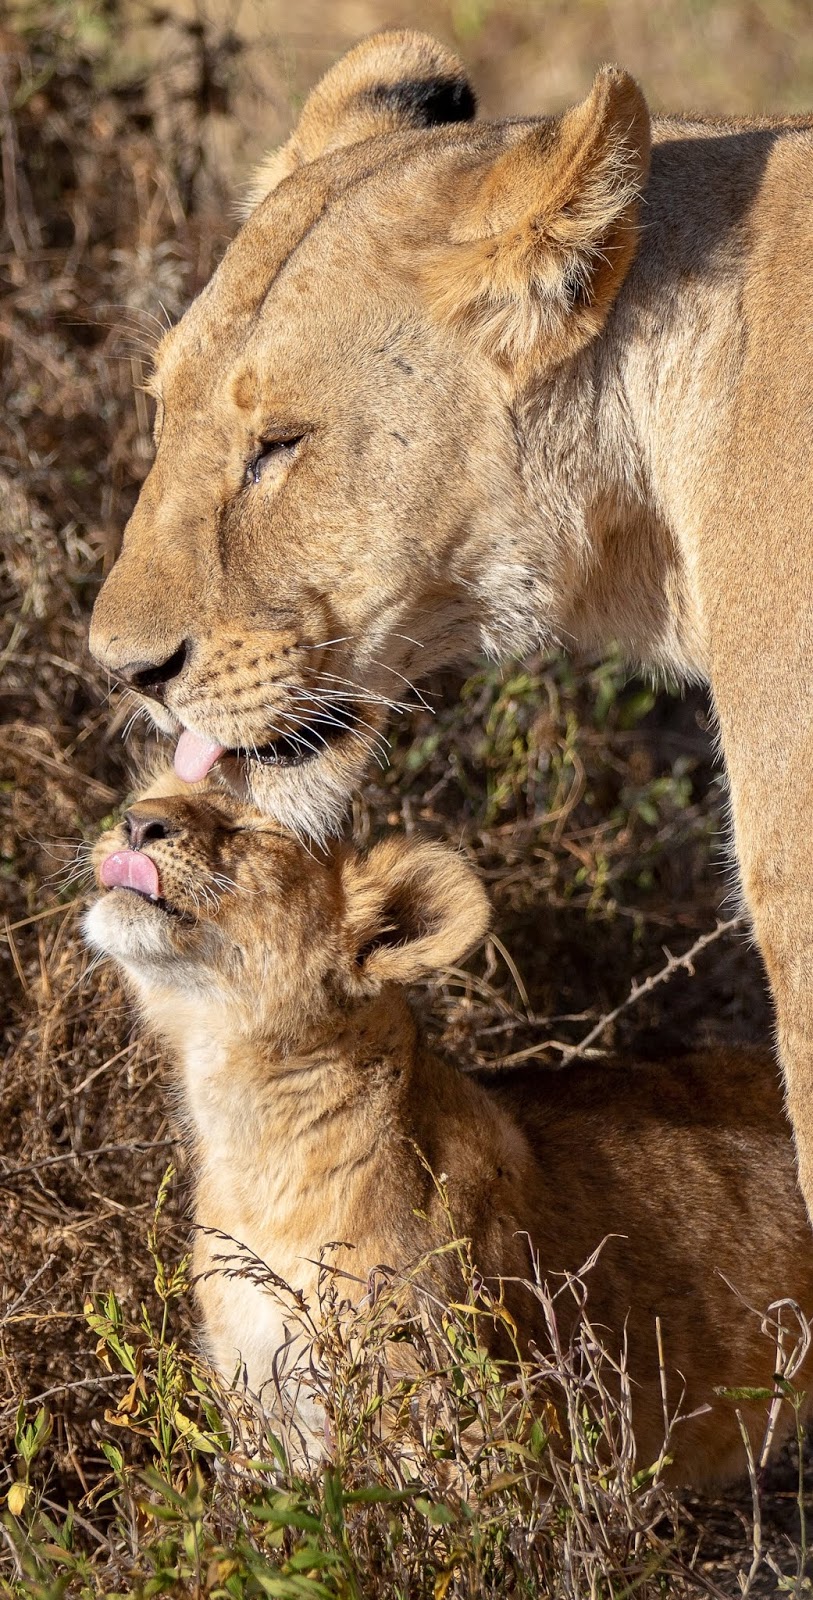 Lioness motherly love.